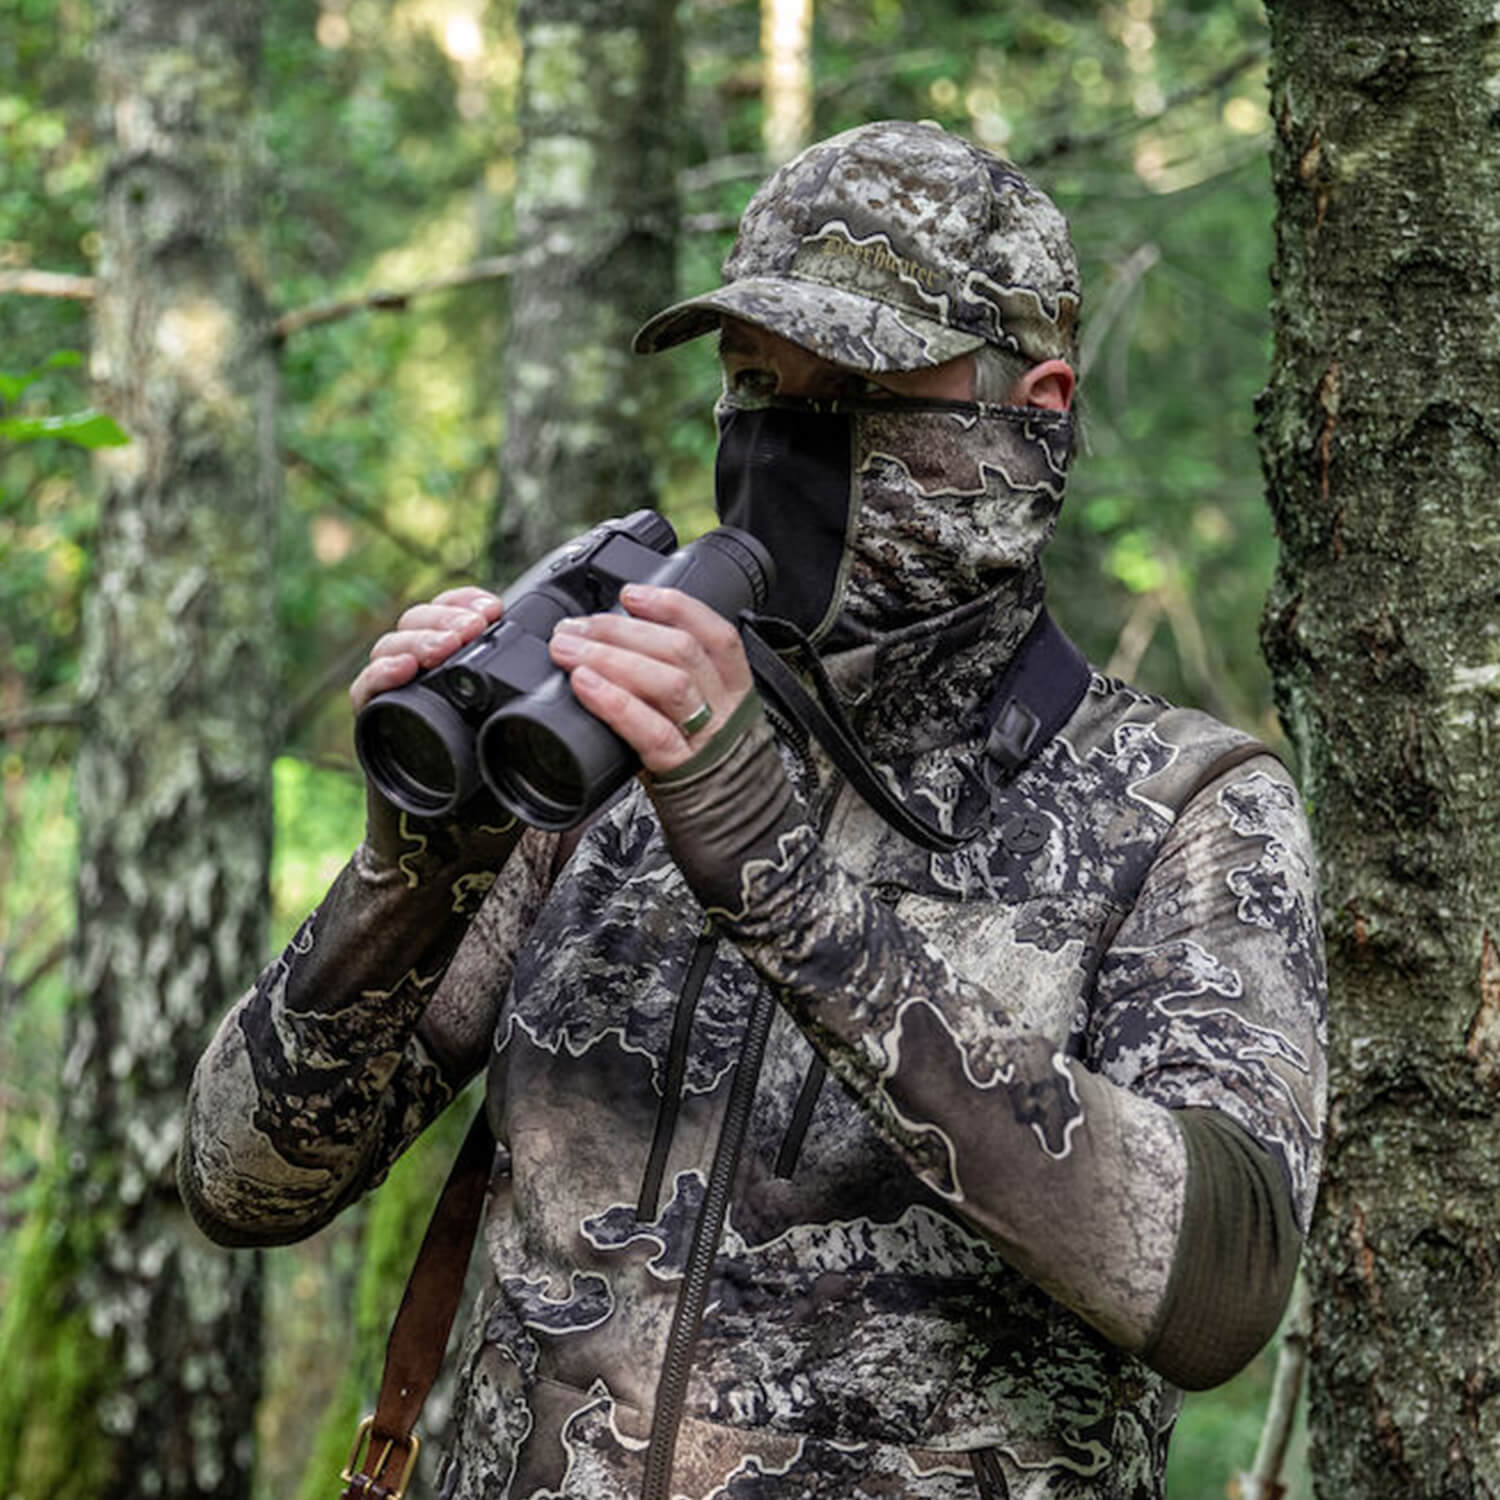 Deerhunter Facemask Excape (Realtree Excape)